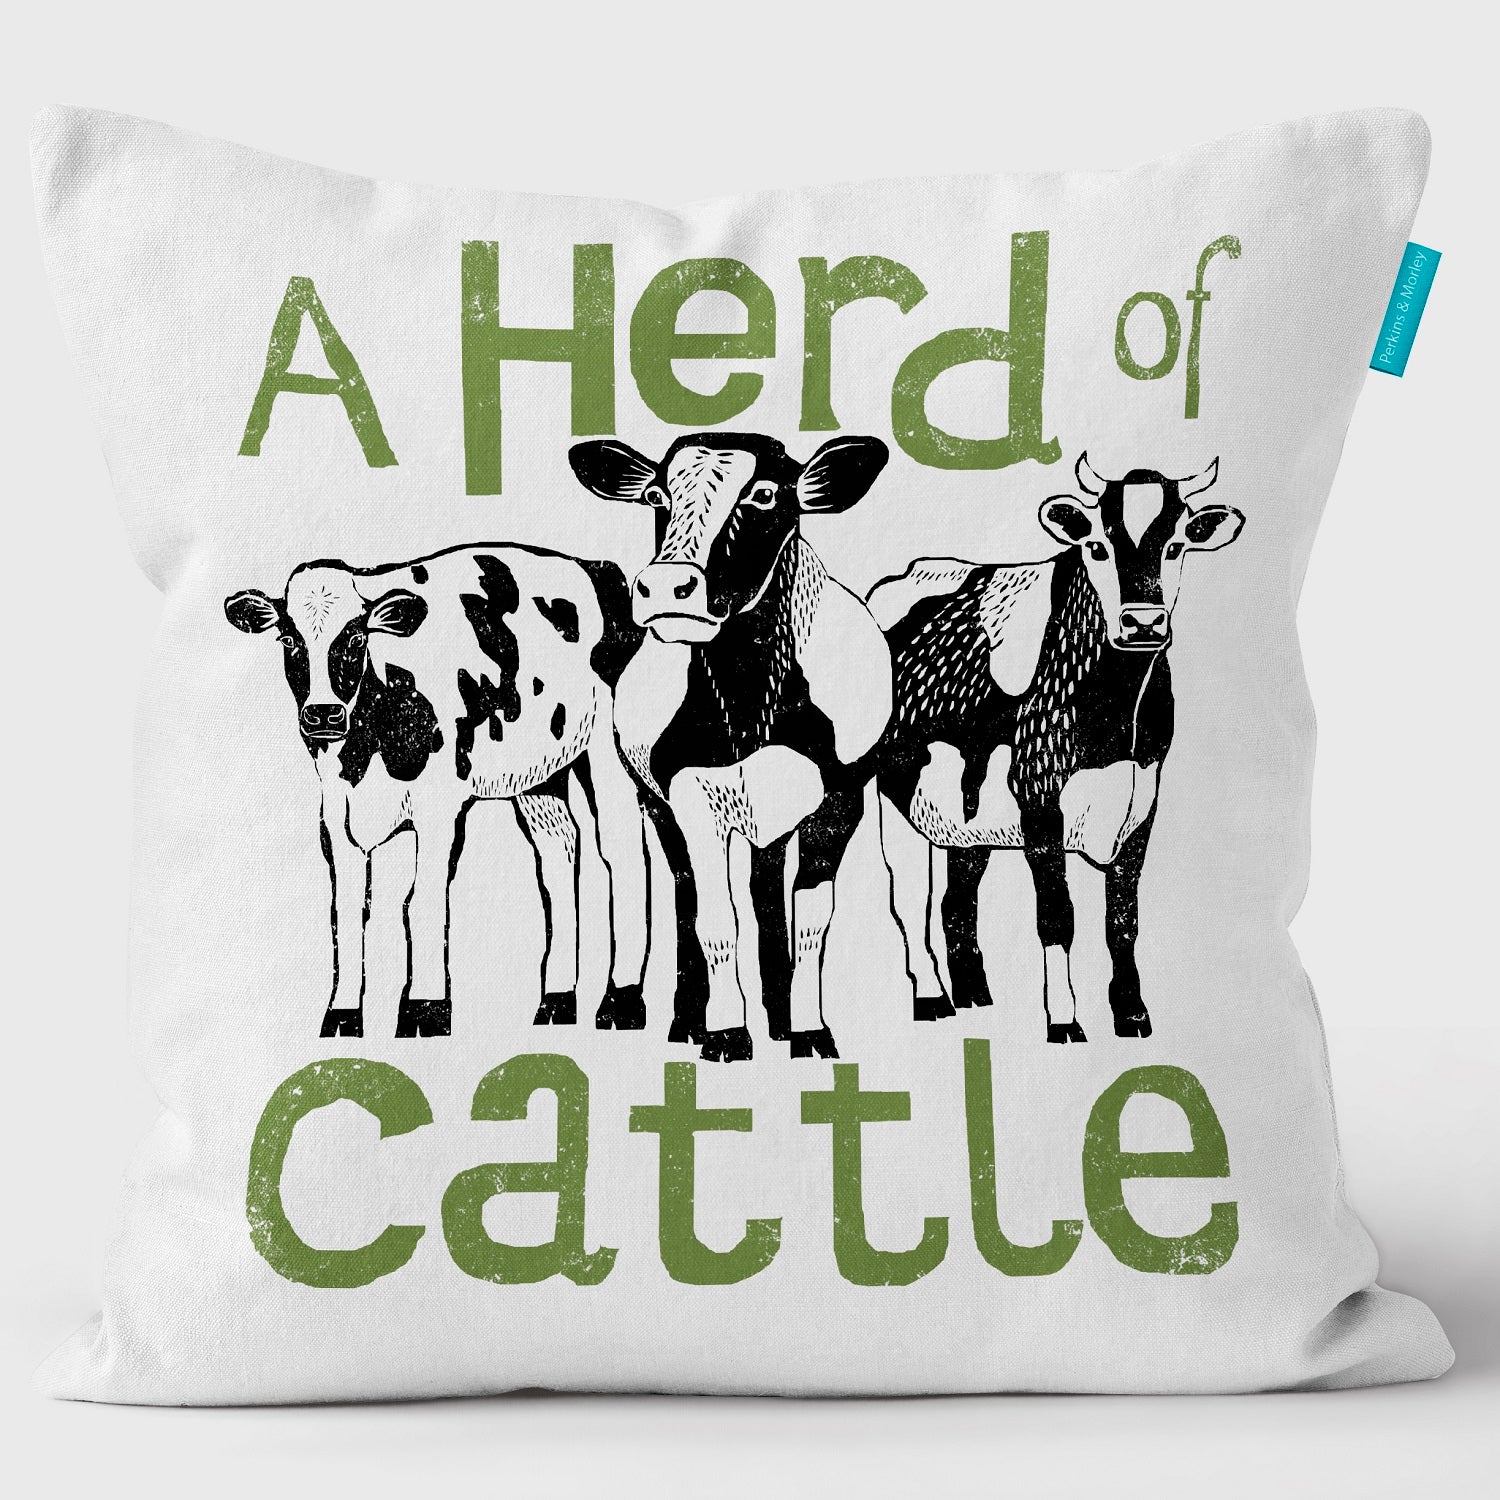 Herd of Cattle - Collective Noun Cushion